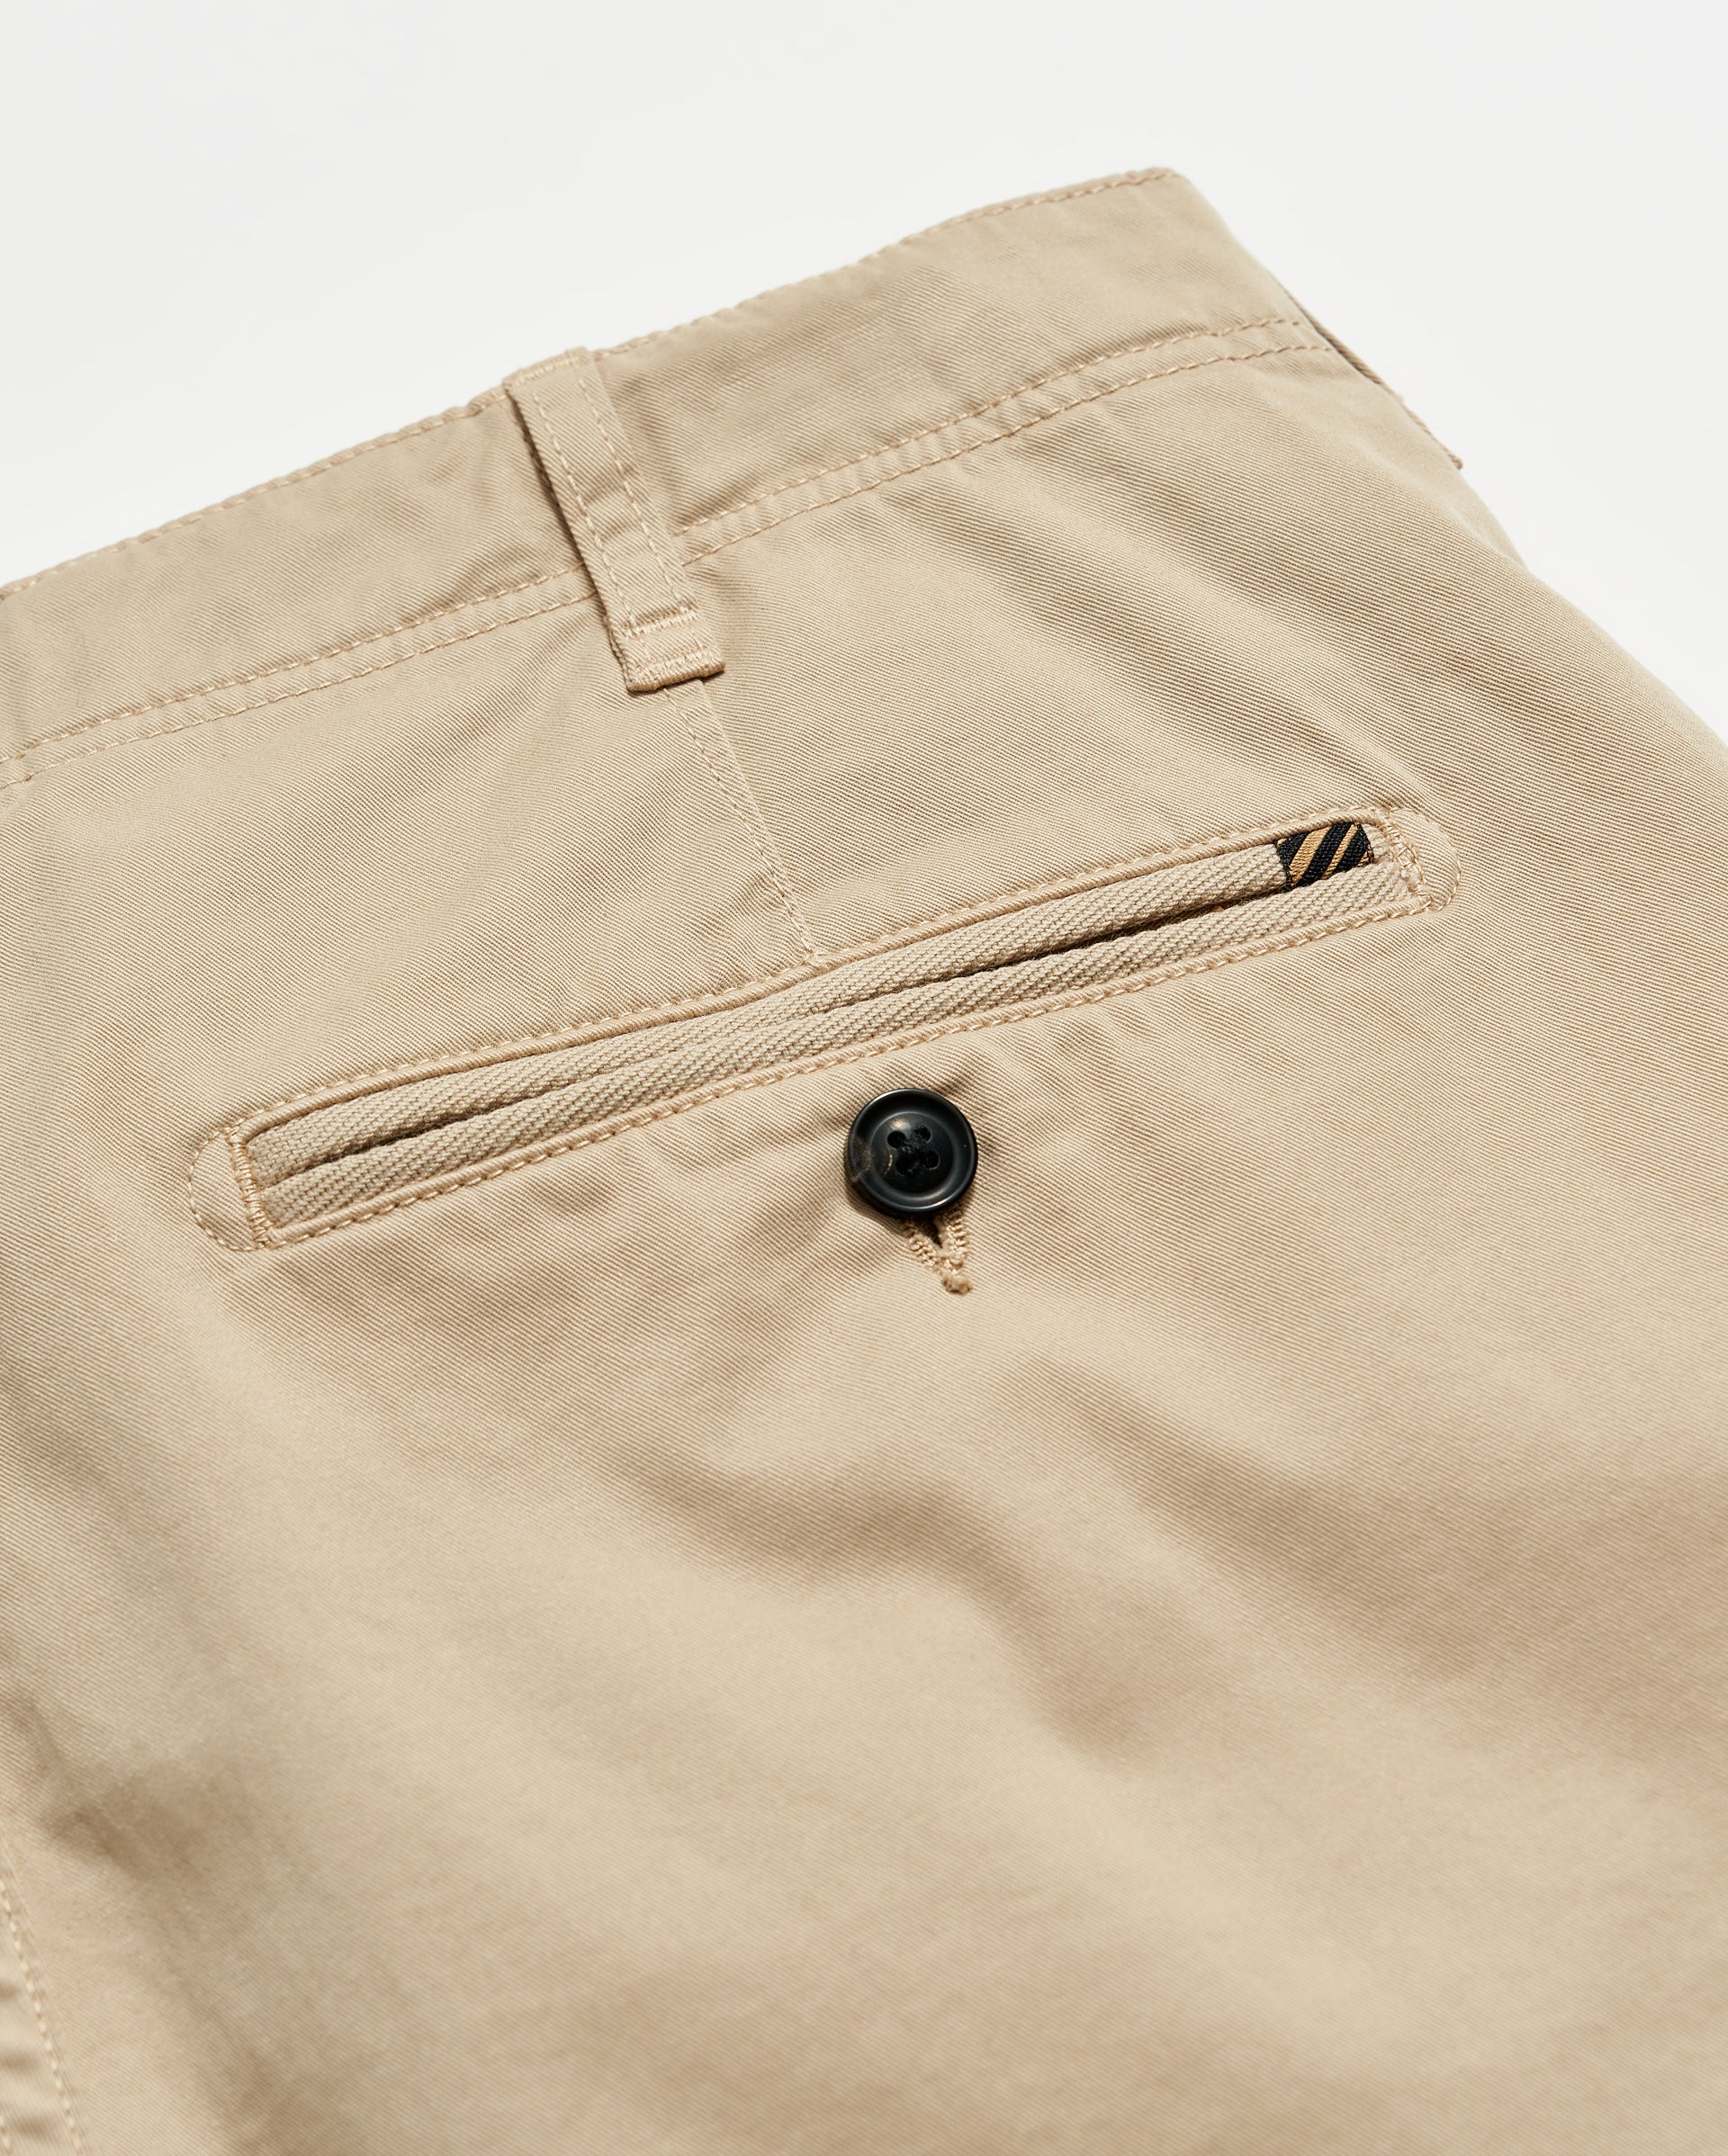 How should chino shorts fit? Width, length, cut & fabric